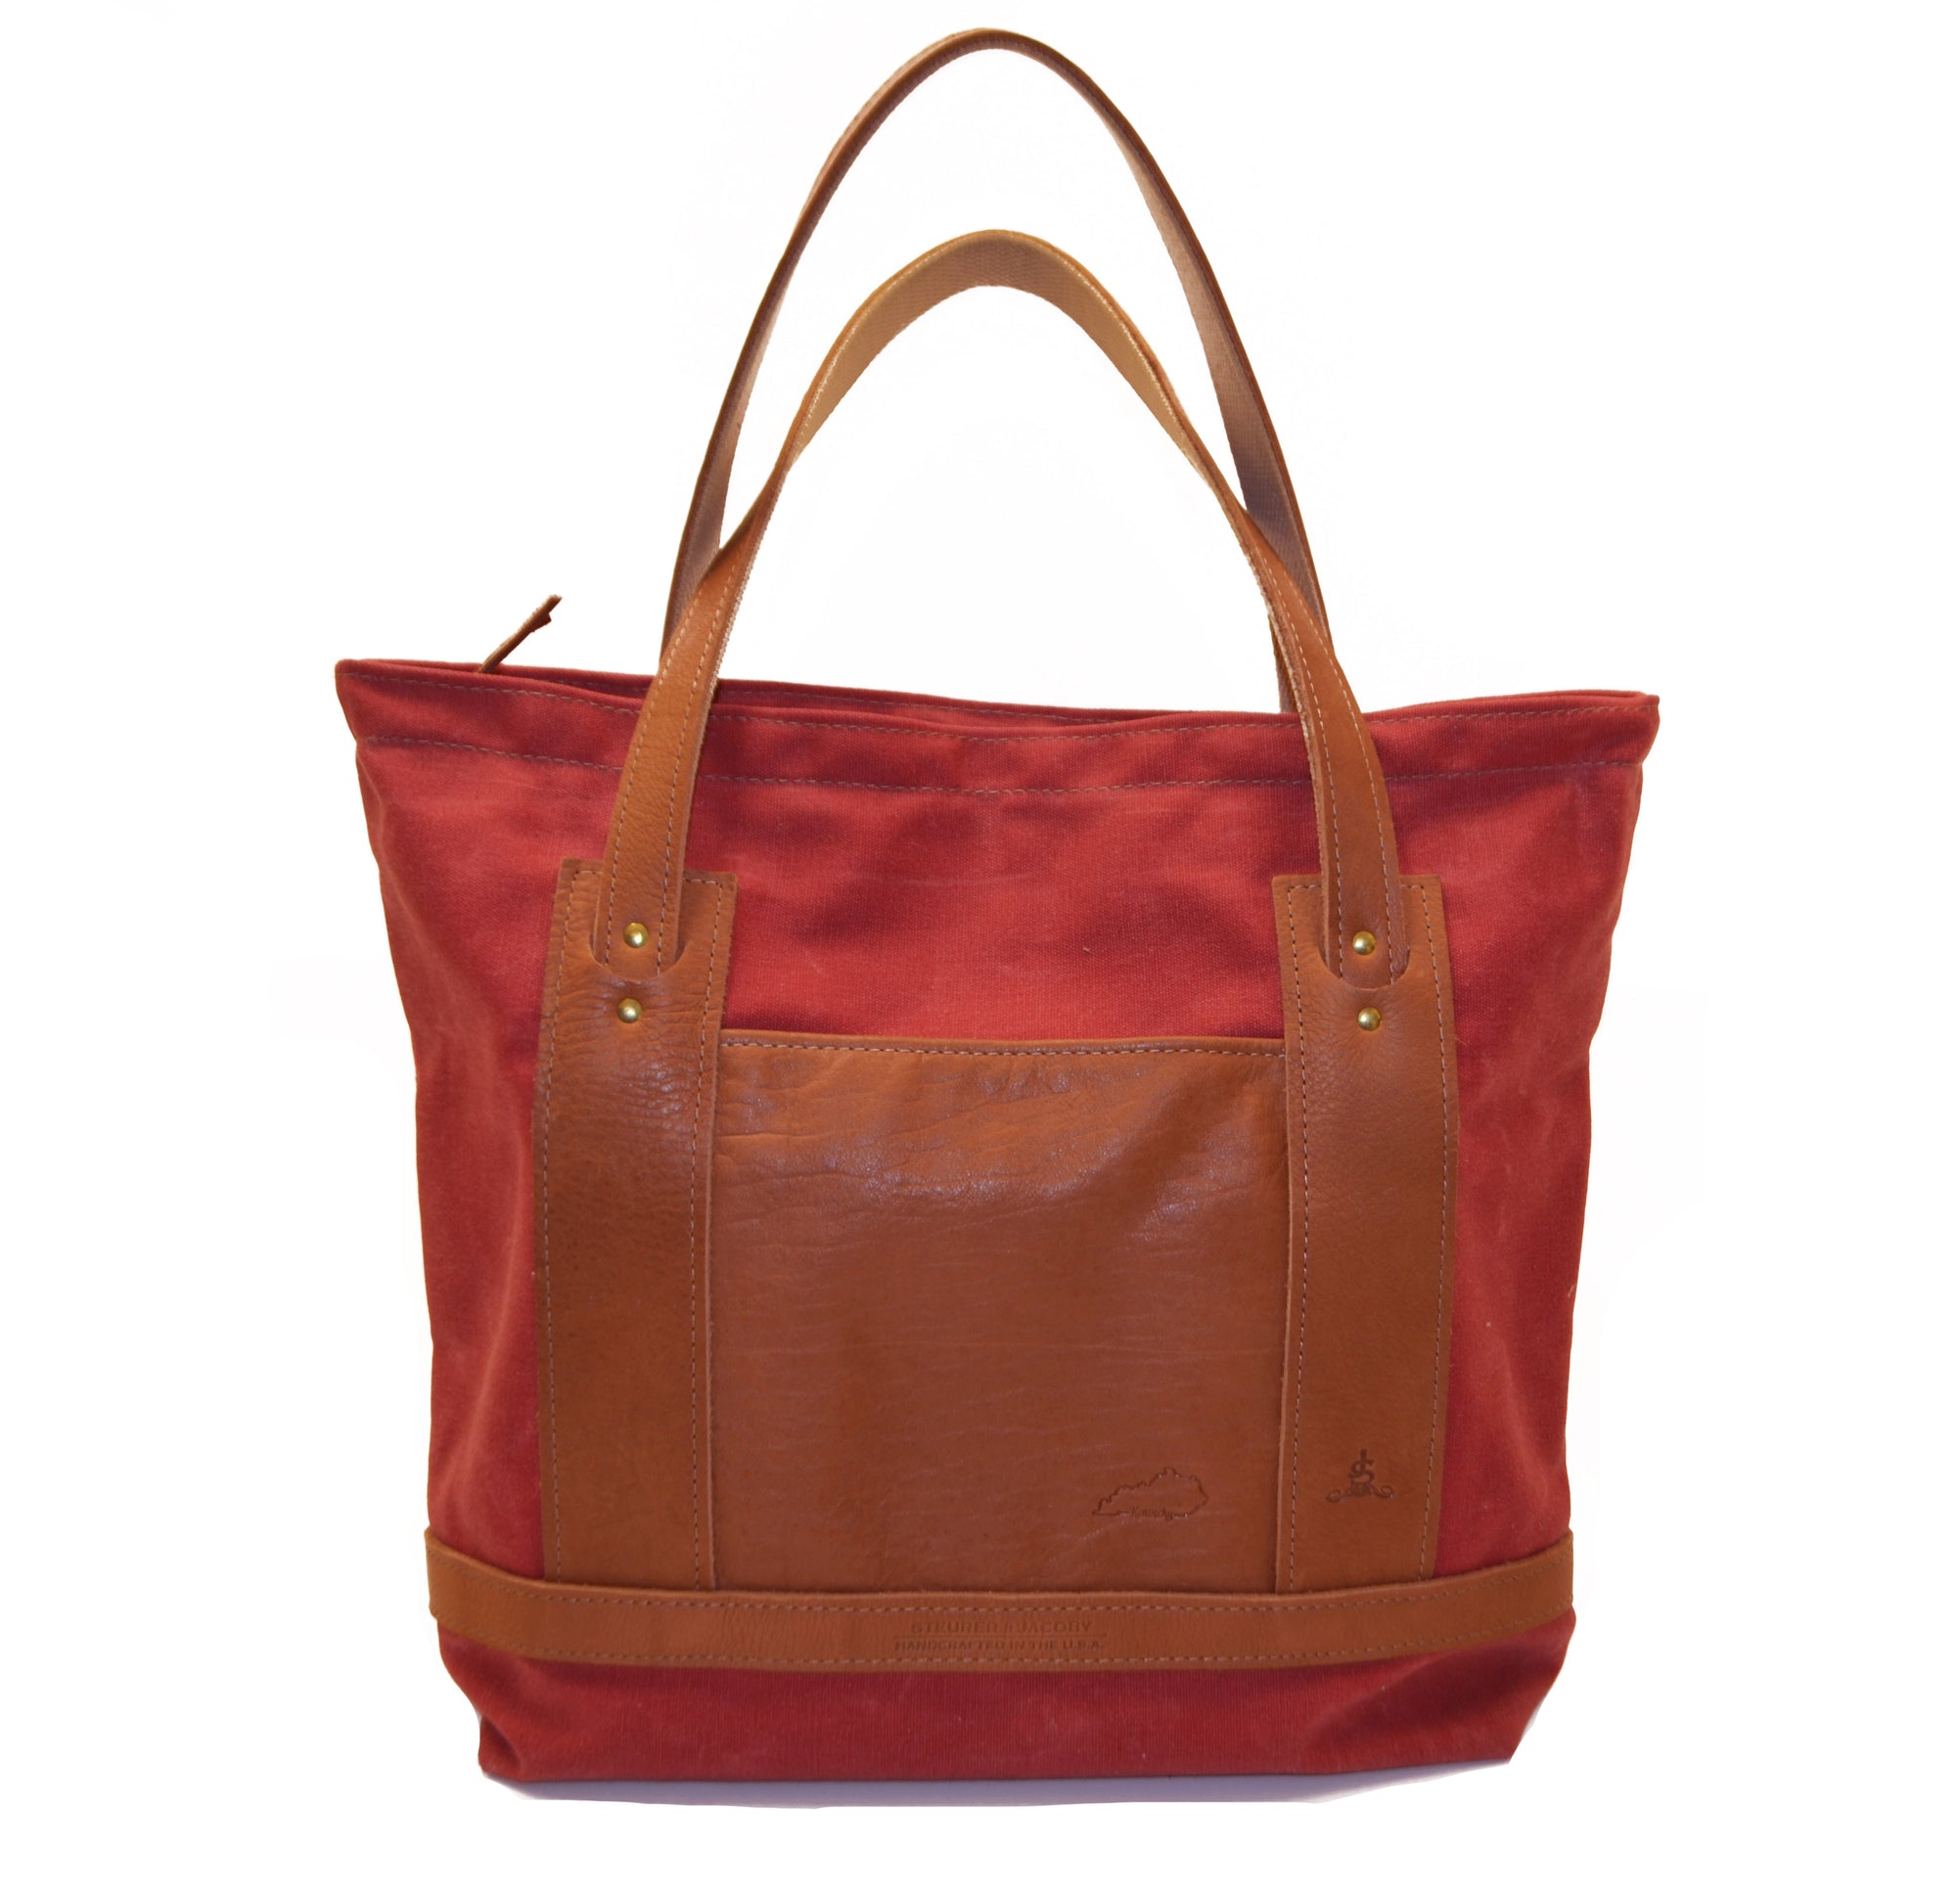 Market Bag- Nantucket Red Waxed Cotton Duck Canvas with Chestnut Leather - Steurer & Jacoby